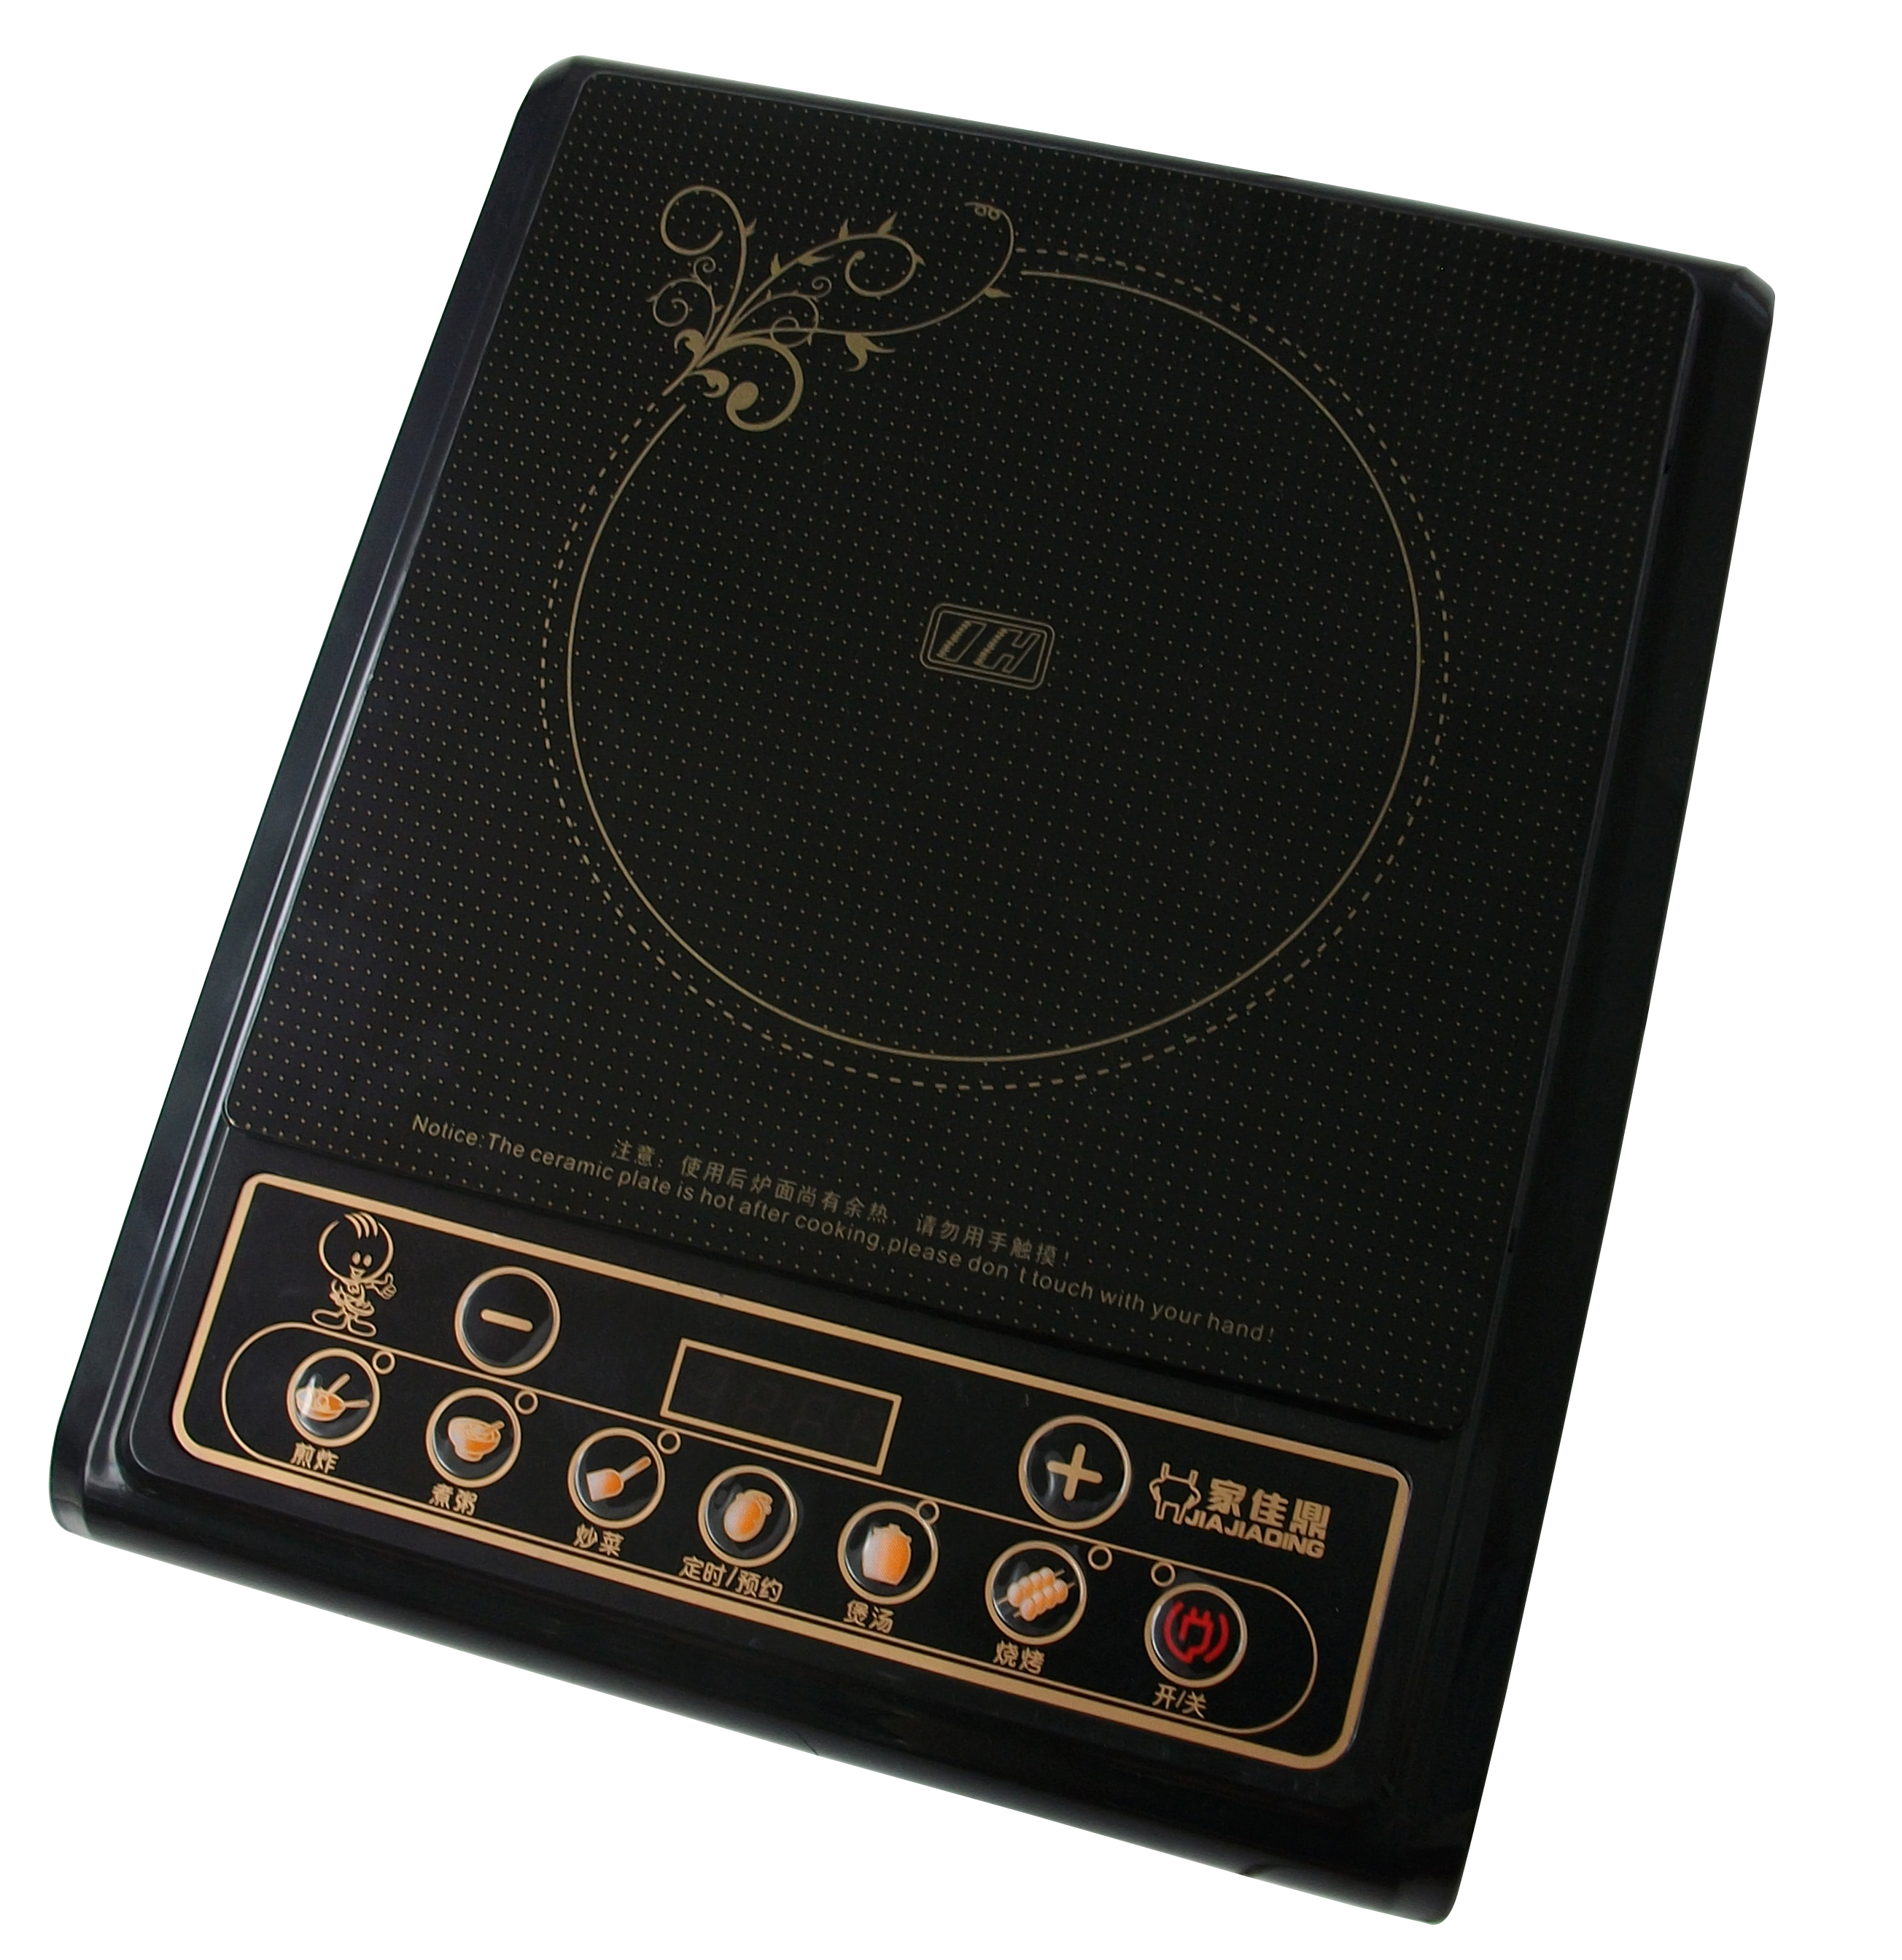 Is Induction Cooker Consuming More Power?